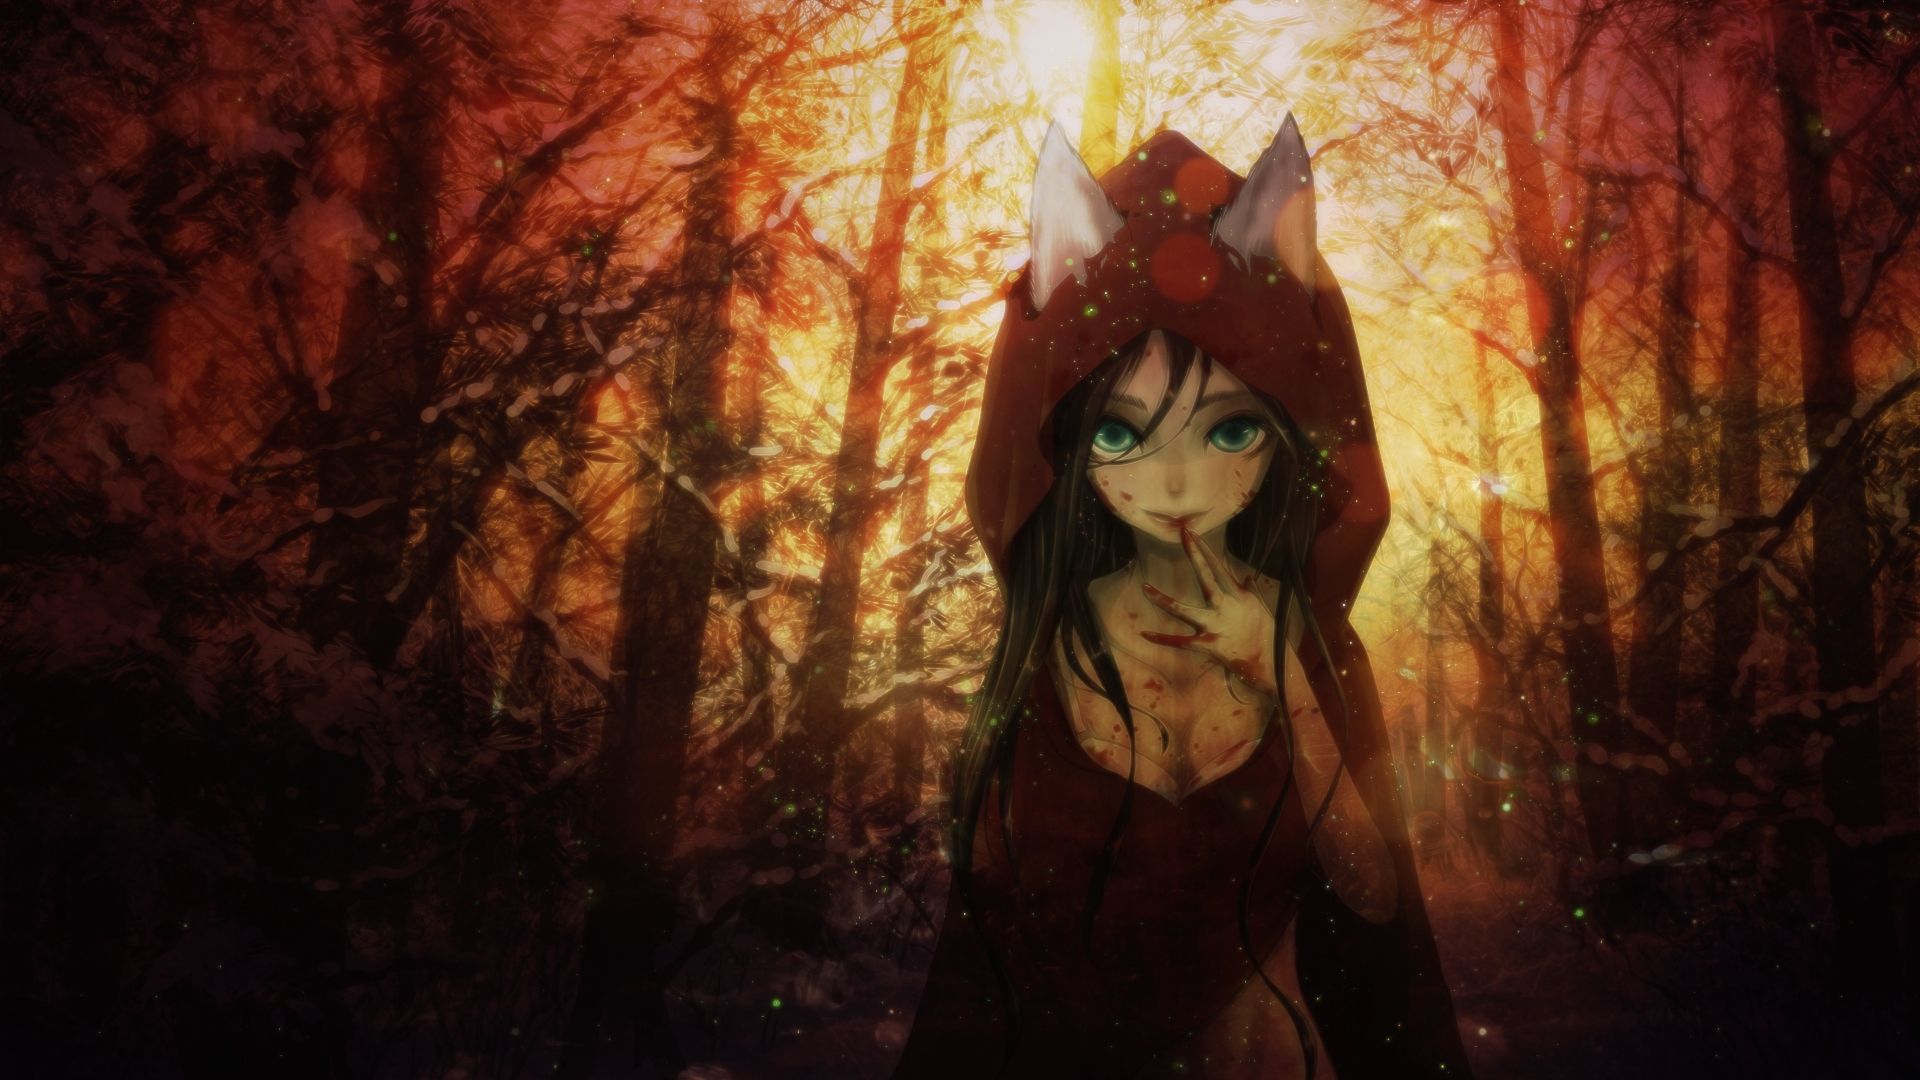 Download 1920x1080 Anime Girl, Fantasy, Animal Ears, Hoodie, Forest Wallpaper for Widescreen